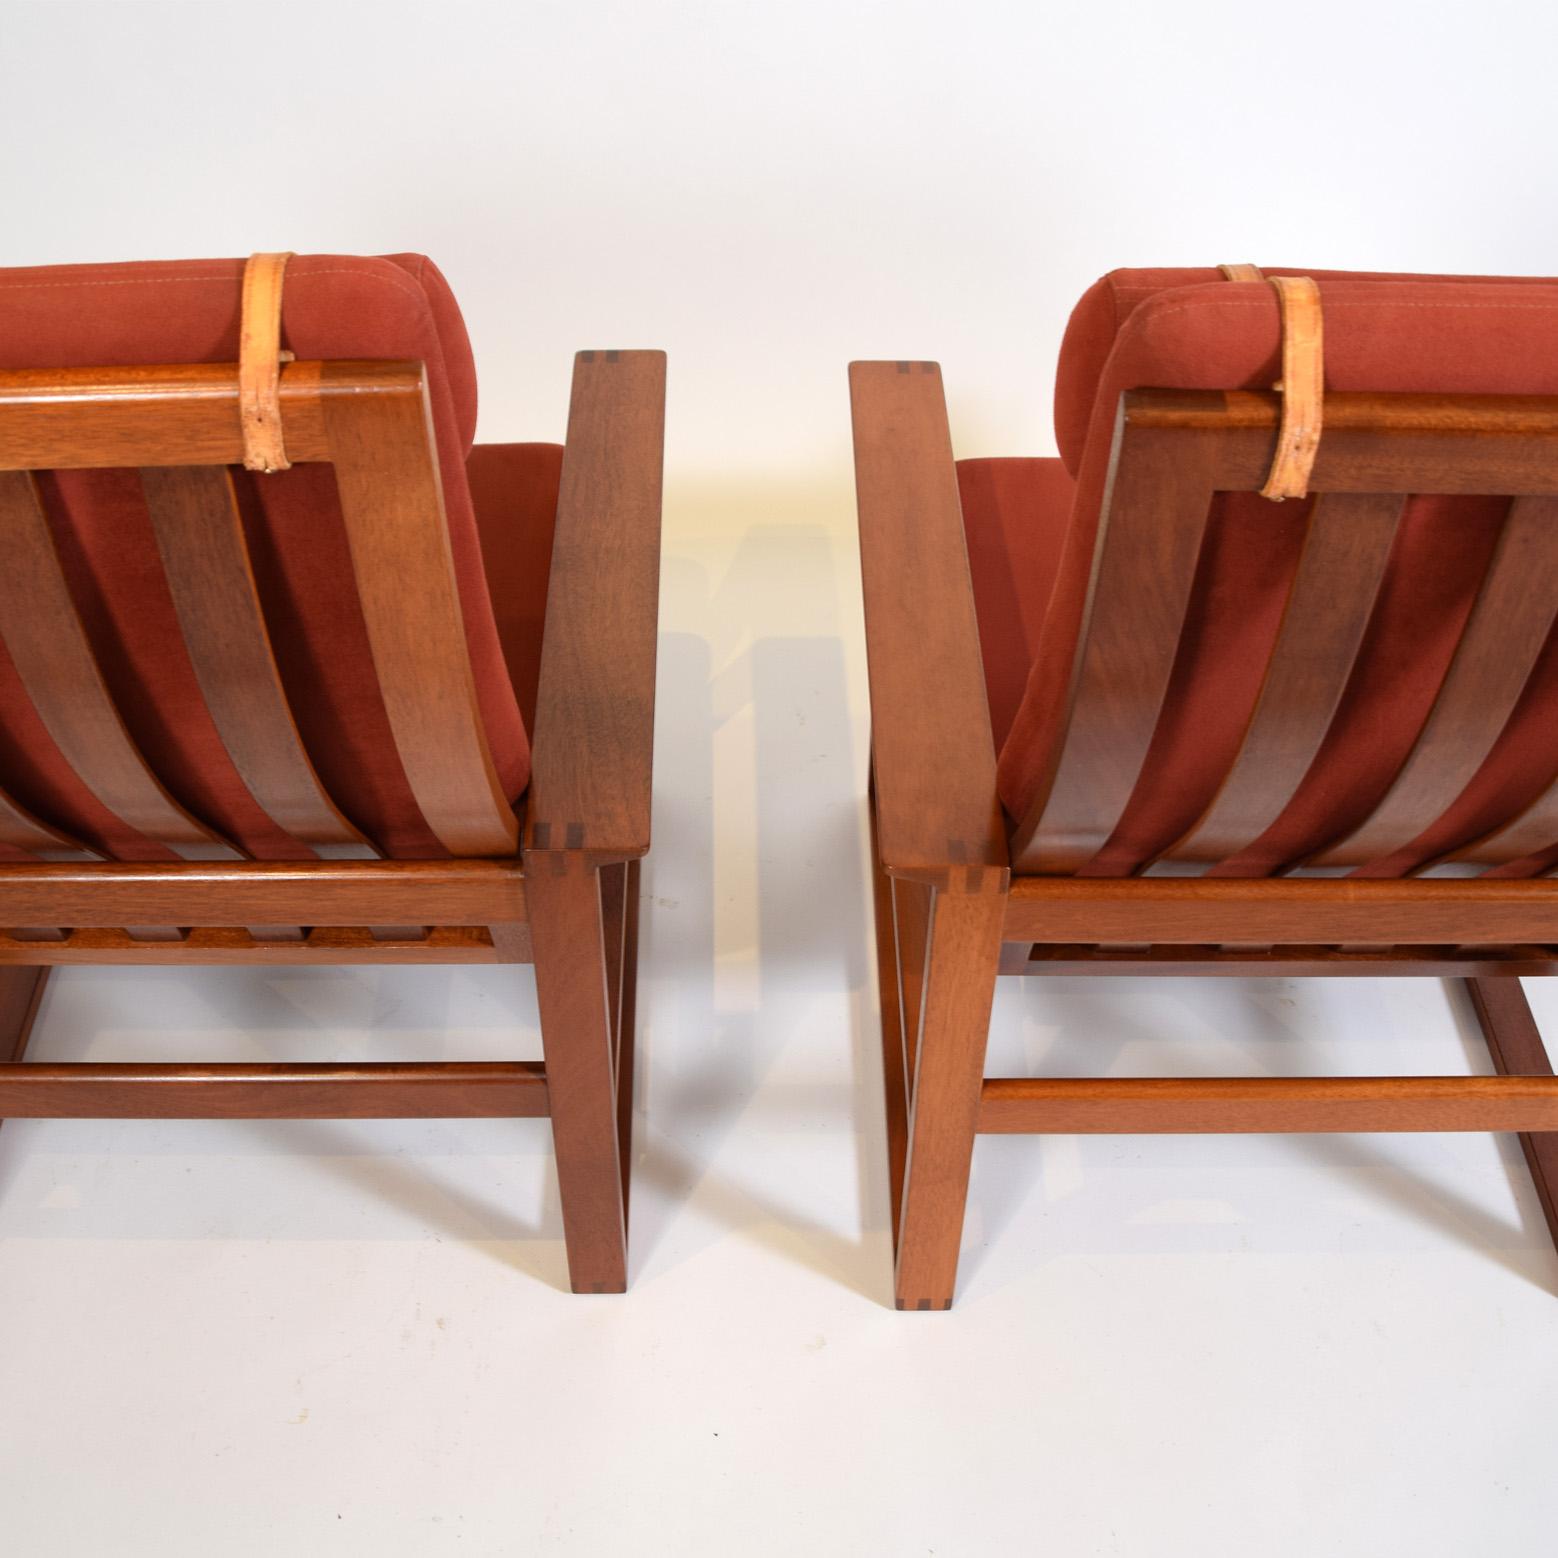 Børge Mogensen, Model 2254 Lounge Chairs, 1956 For Sale 1